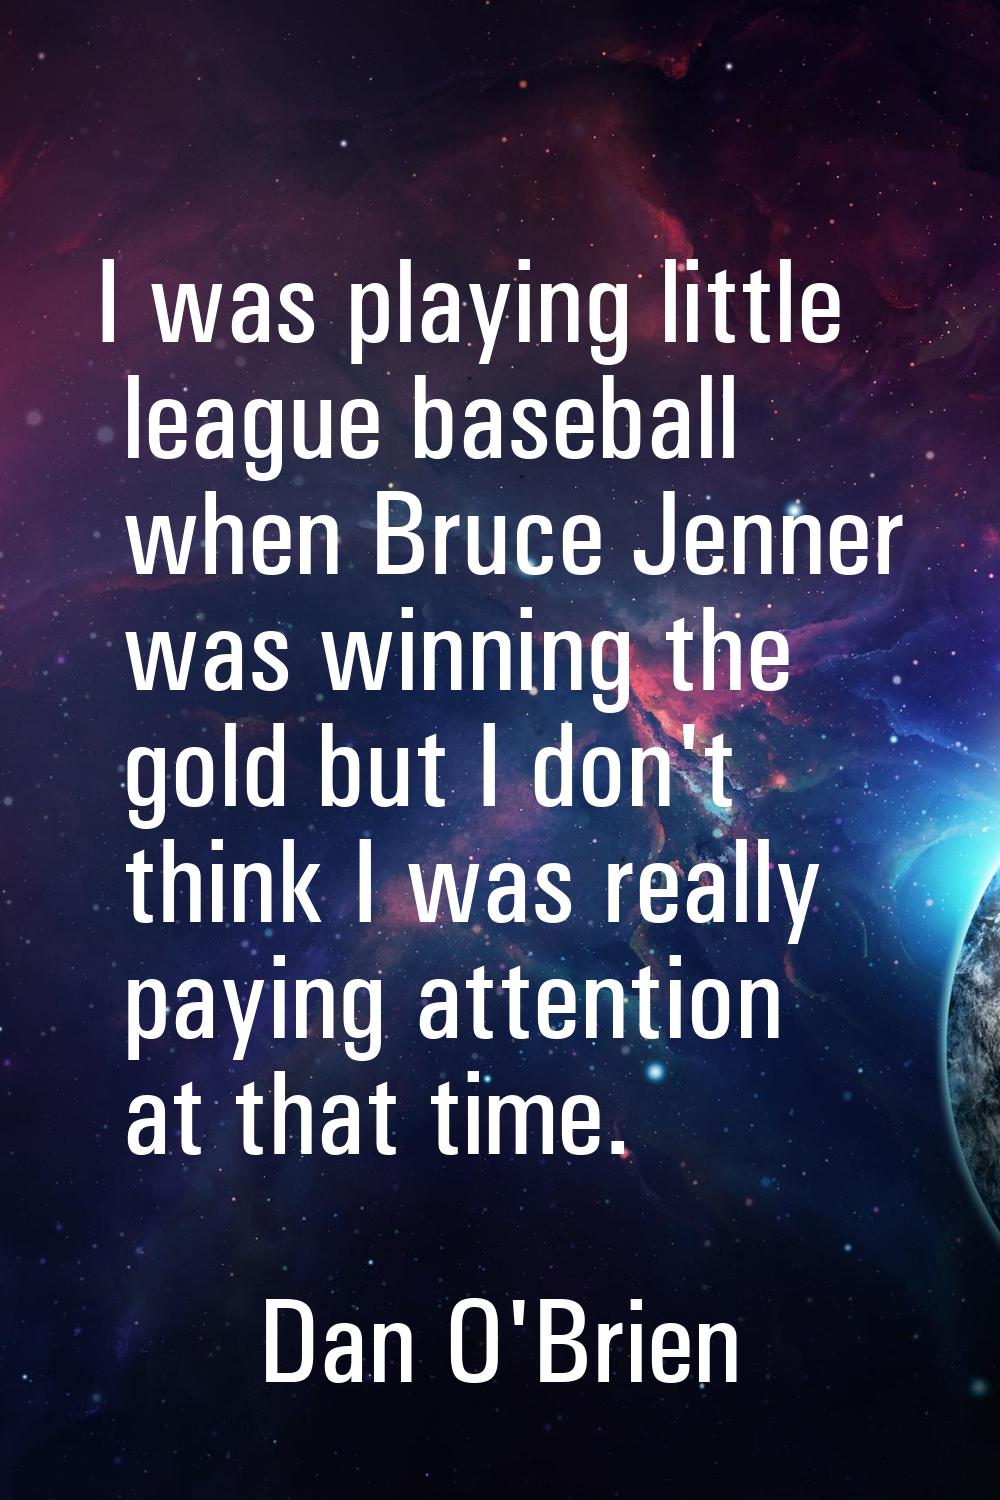 I was playing little league baseball when Bruce Jenner was winning the gold but I don't think I was